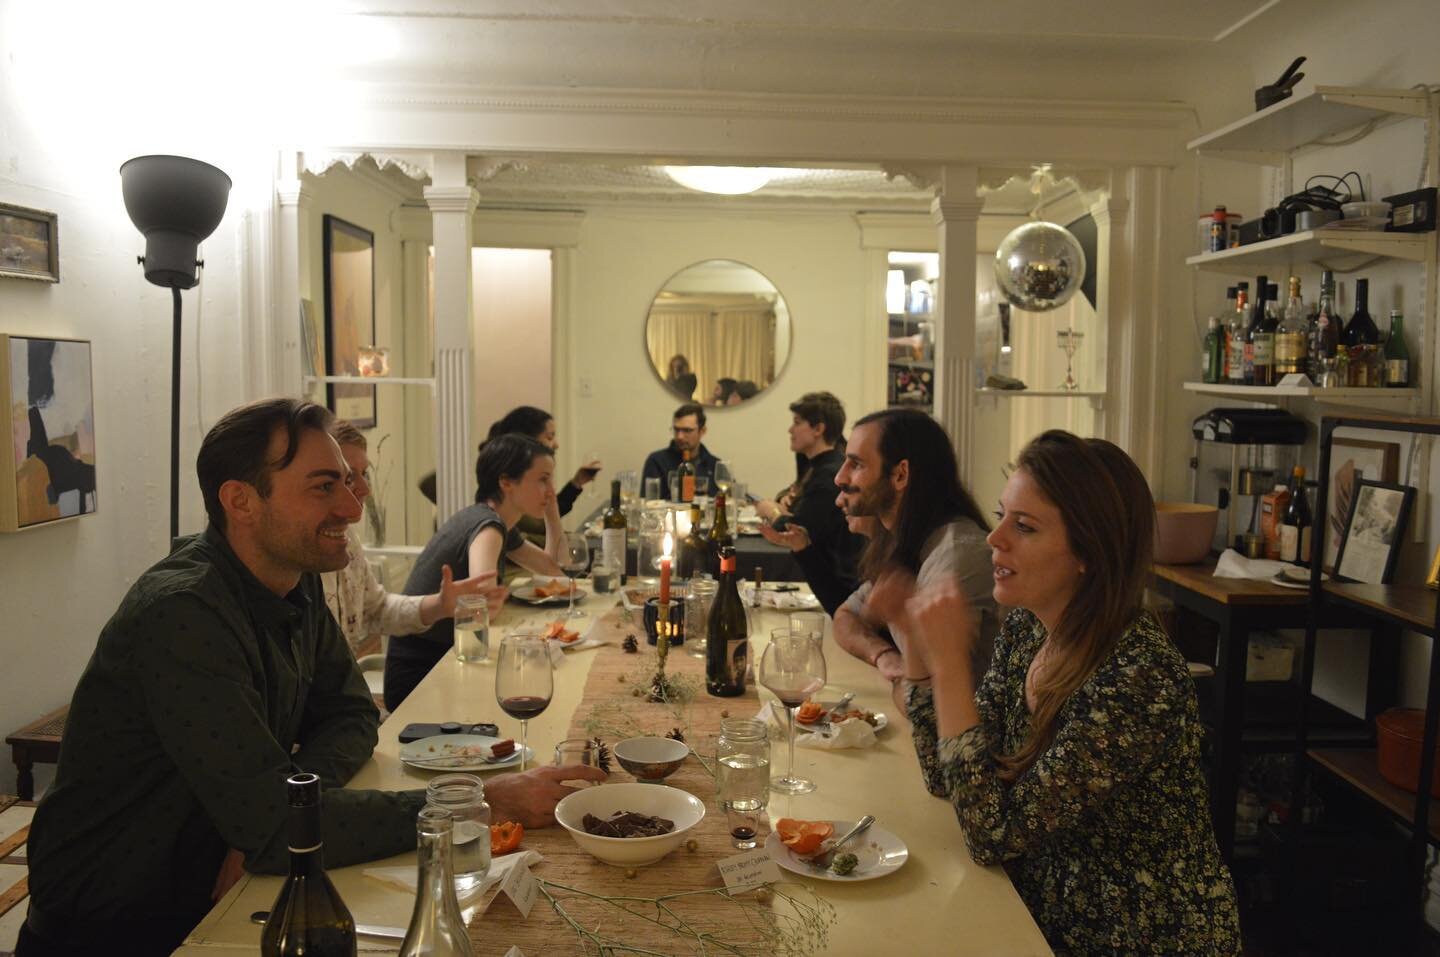 We&rsquo;re back! The Kino Soir&eacute;e re-launch dinner was a huge success, filled with wonderful people, conversation, food &amp; wine. I&rsquo;m over the moon to be bringing this back. Thank you to all the incredible filmmakers who came out! 
.
F